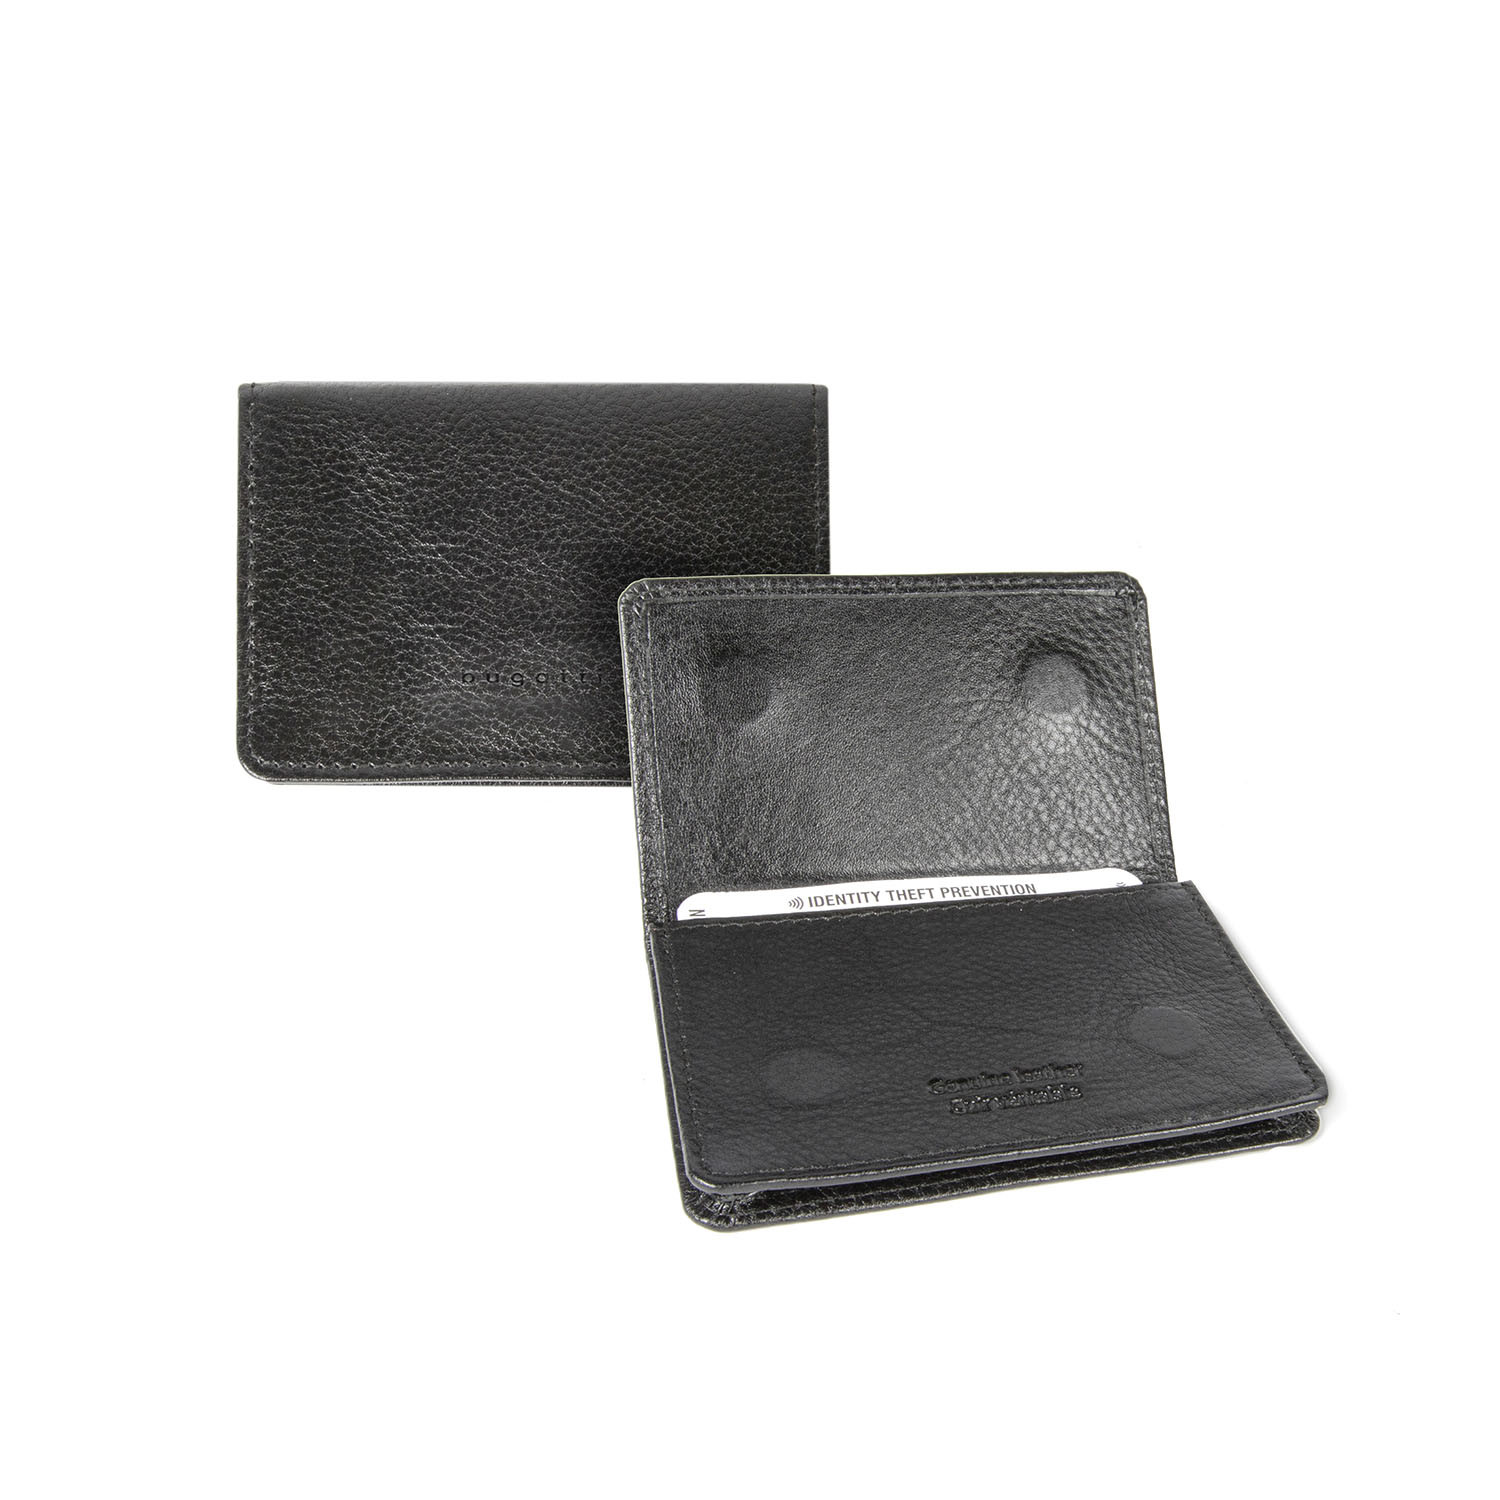 Business Card Case VTM Leather IDB // Black - Bugatti - Touch of Modern